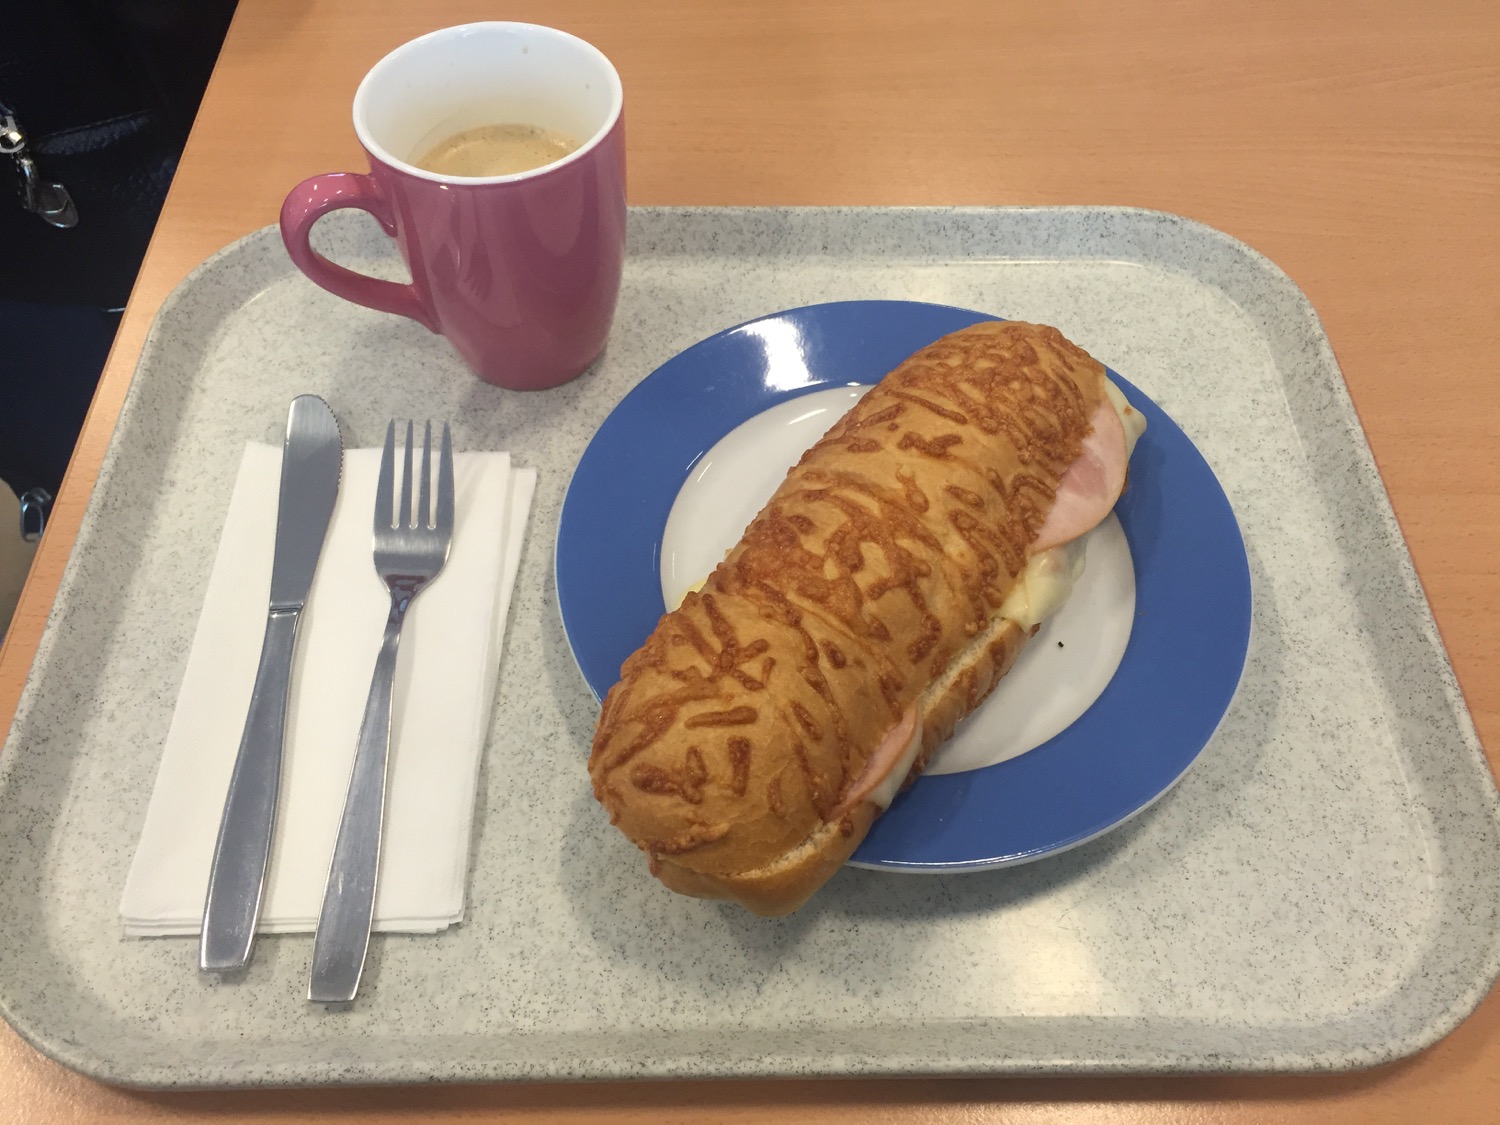 a sandwich on a plate with a cup of coffee and silverware on a tray